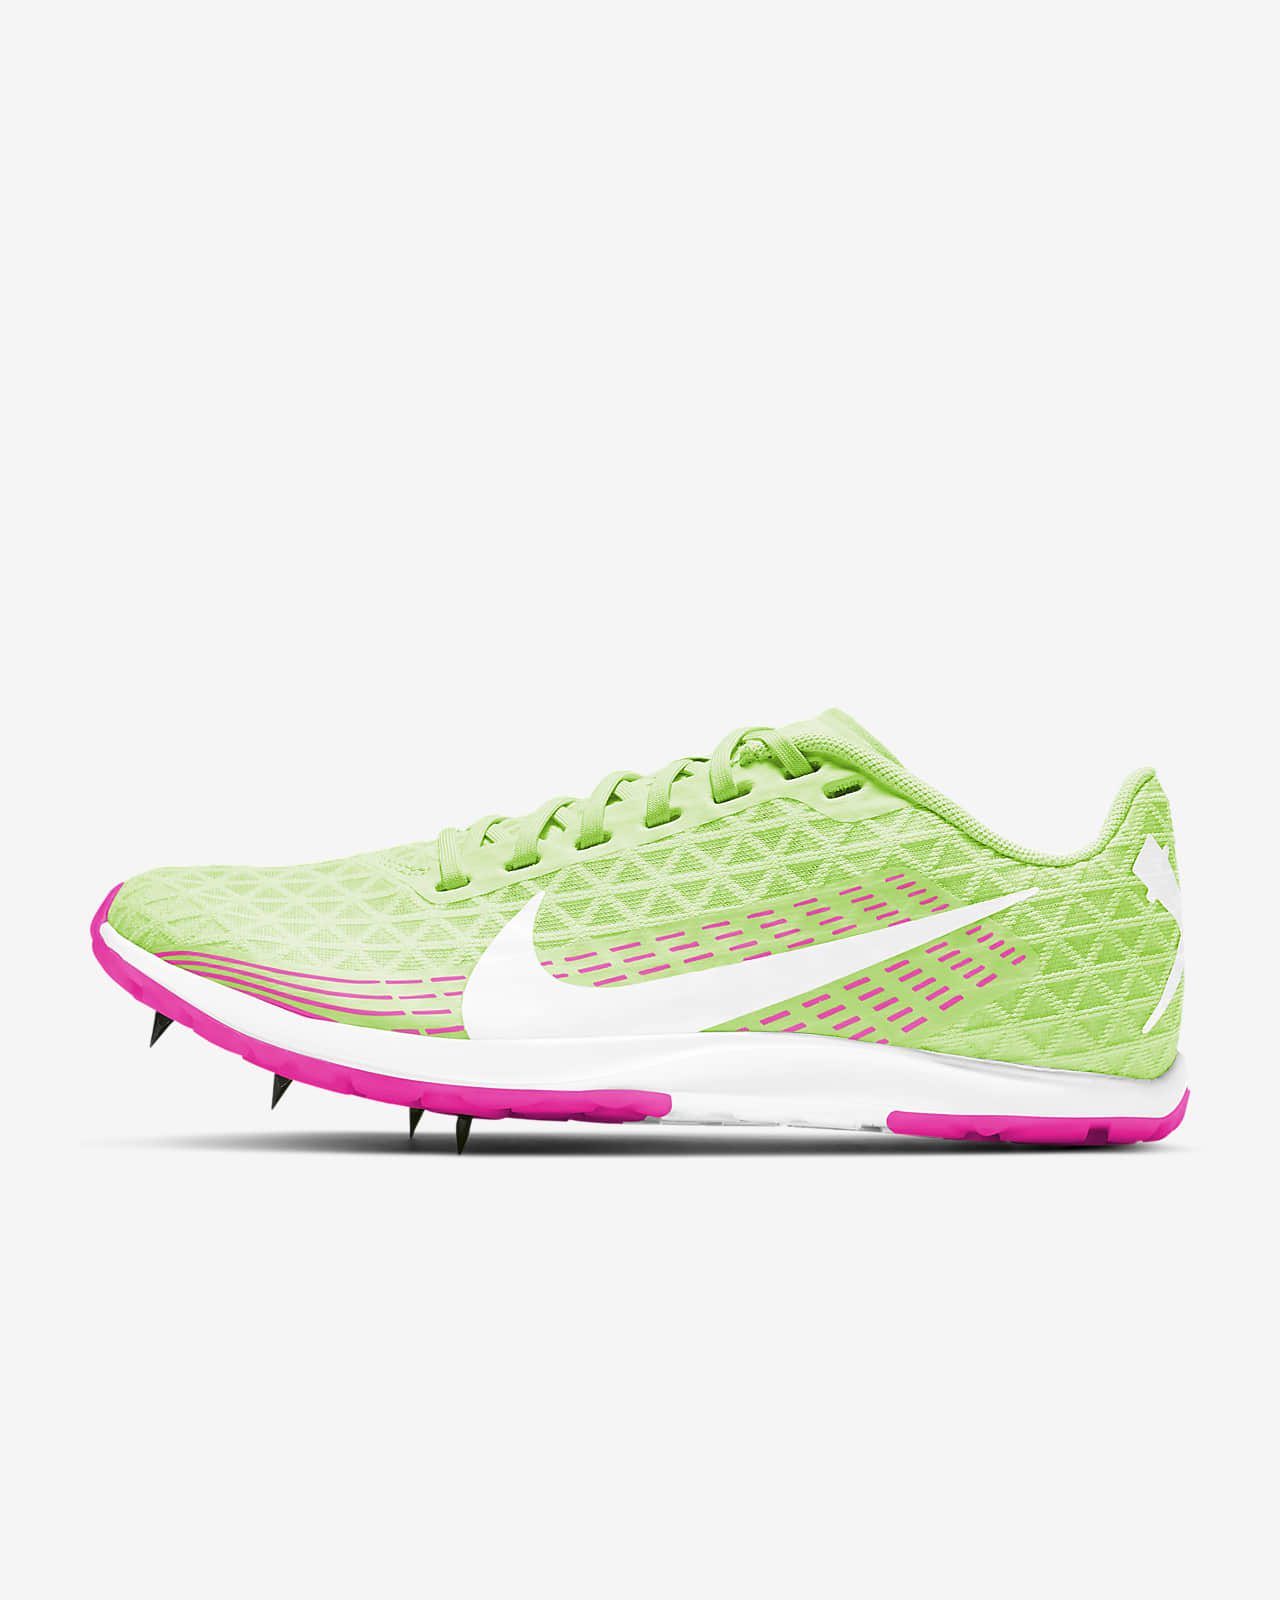 nike zoom victory xc 3 distance spikes shoes